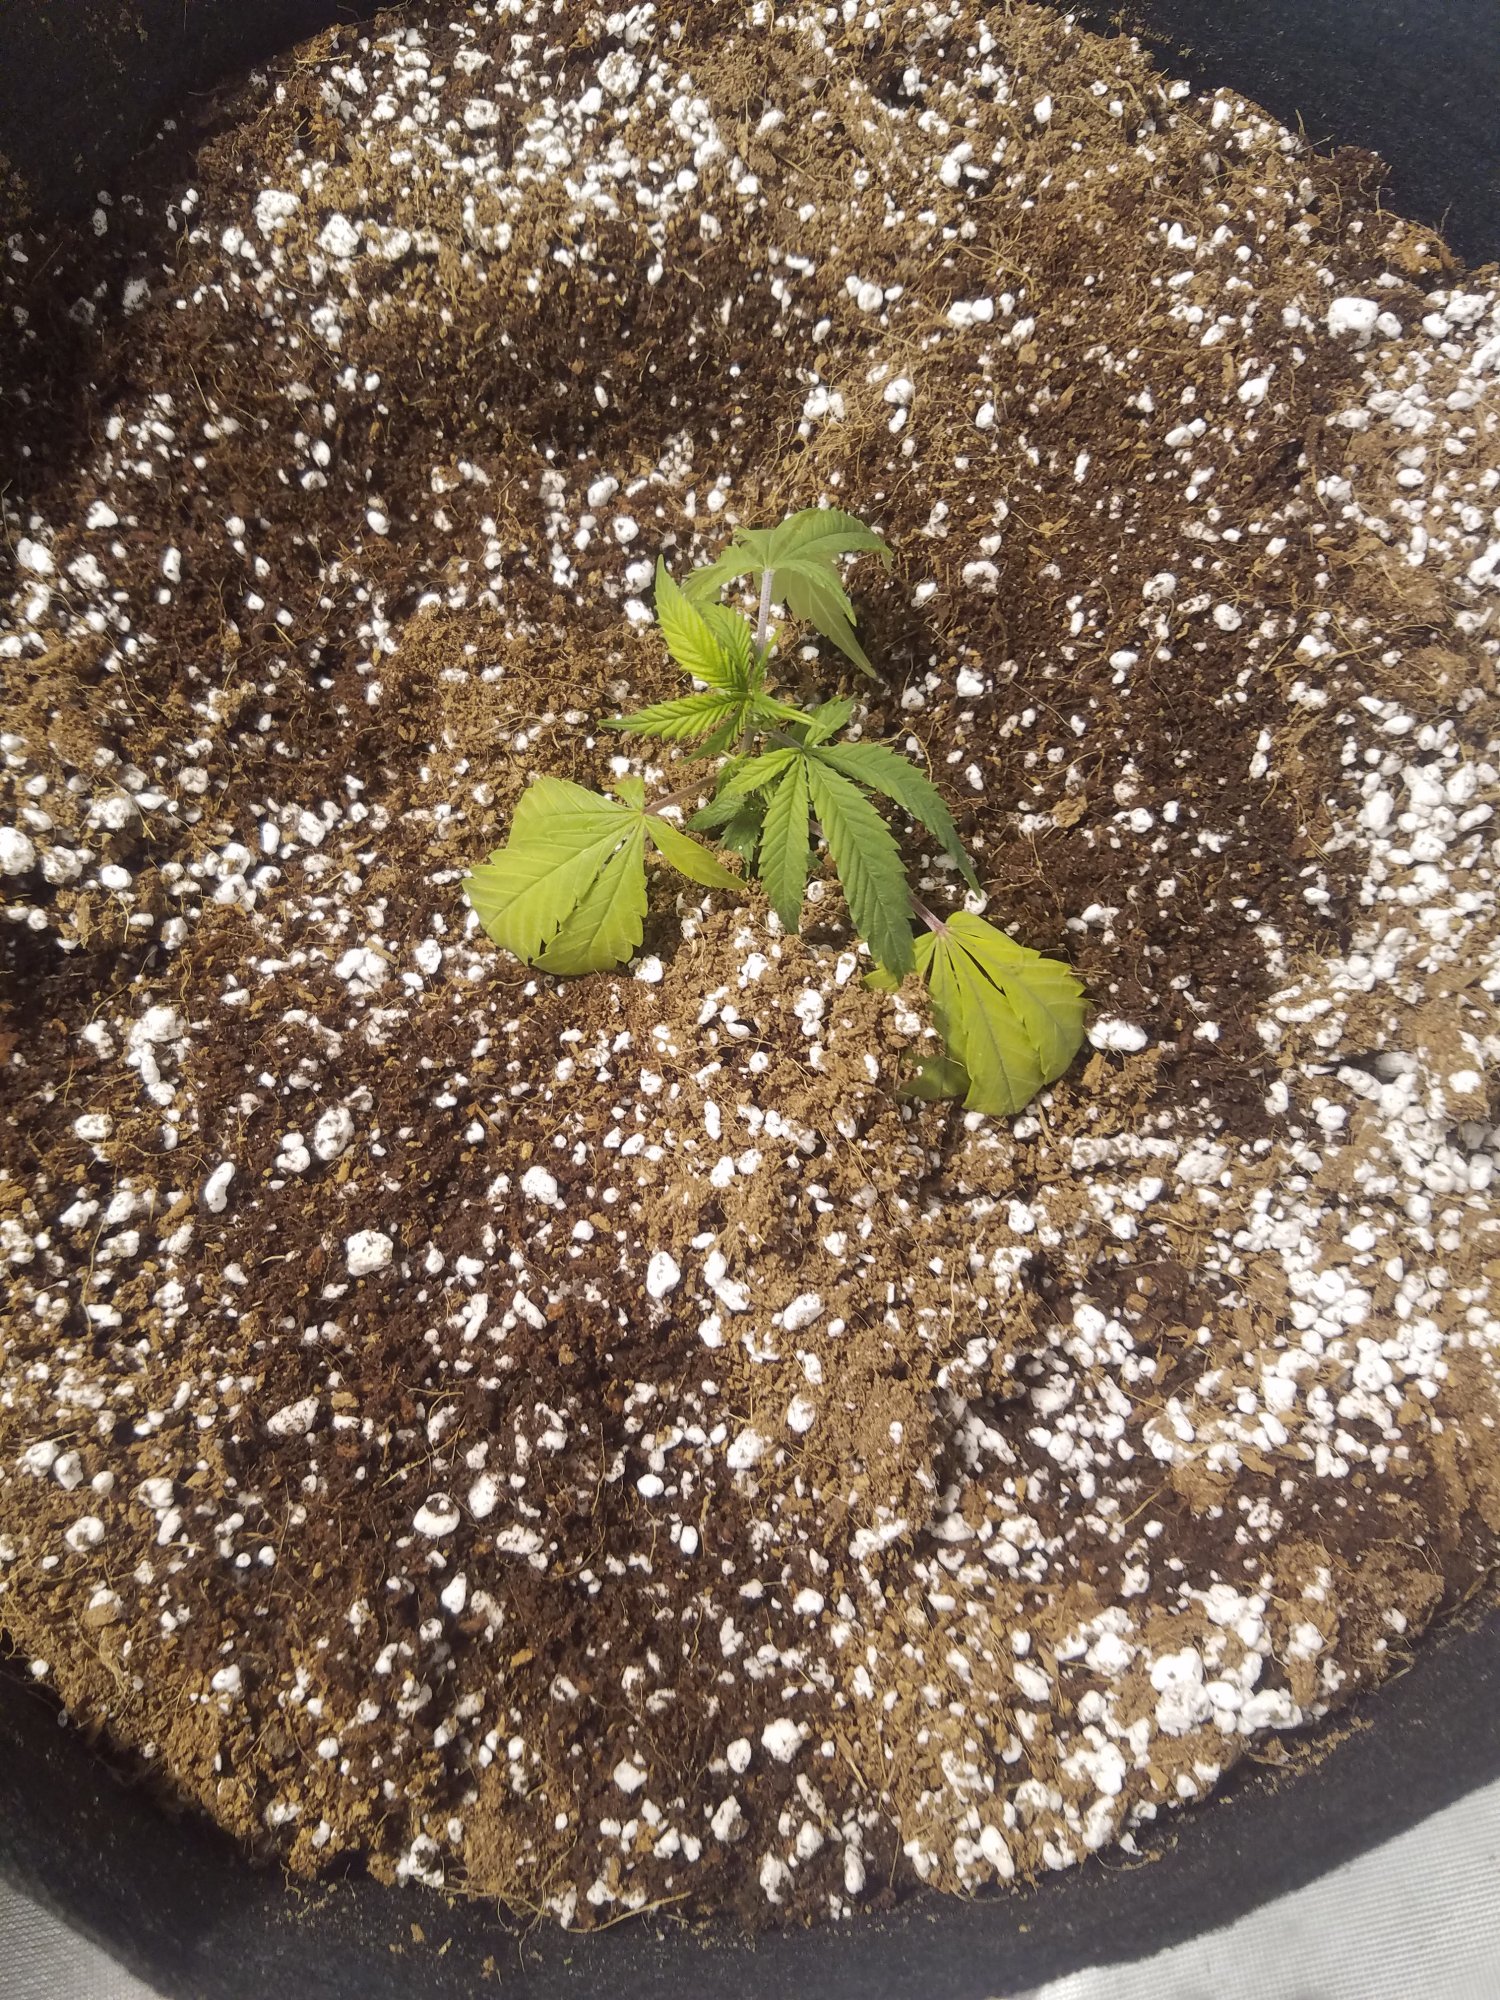 My rooted clones always seem to yellow badly before taking off 2